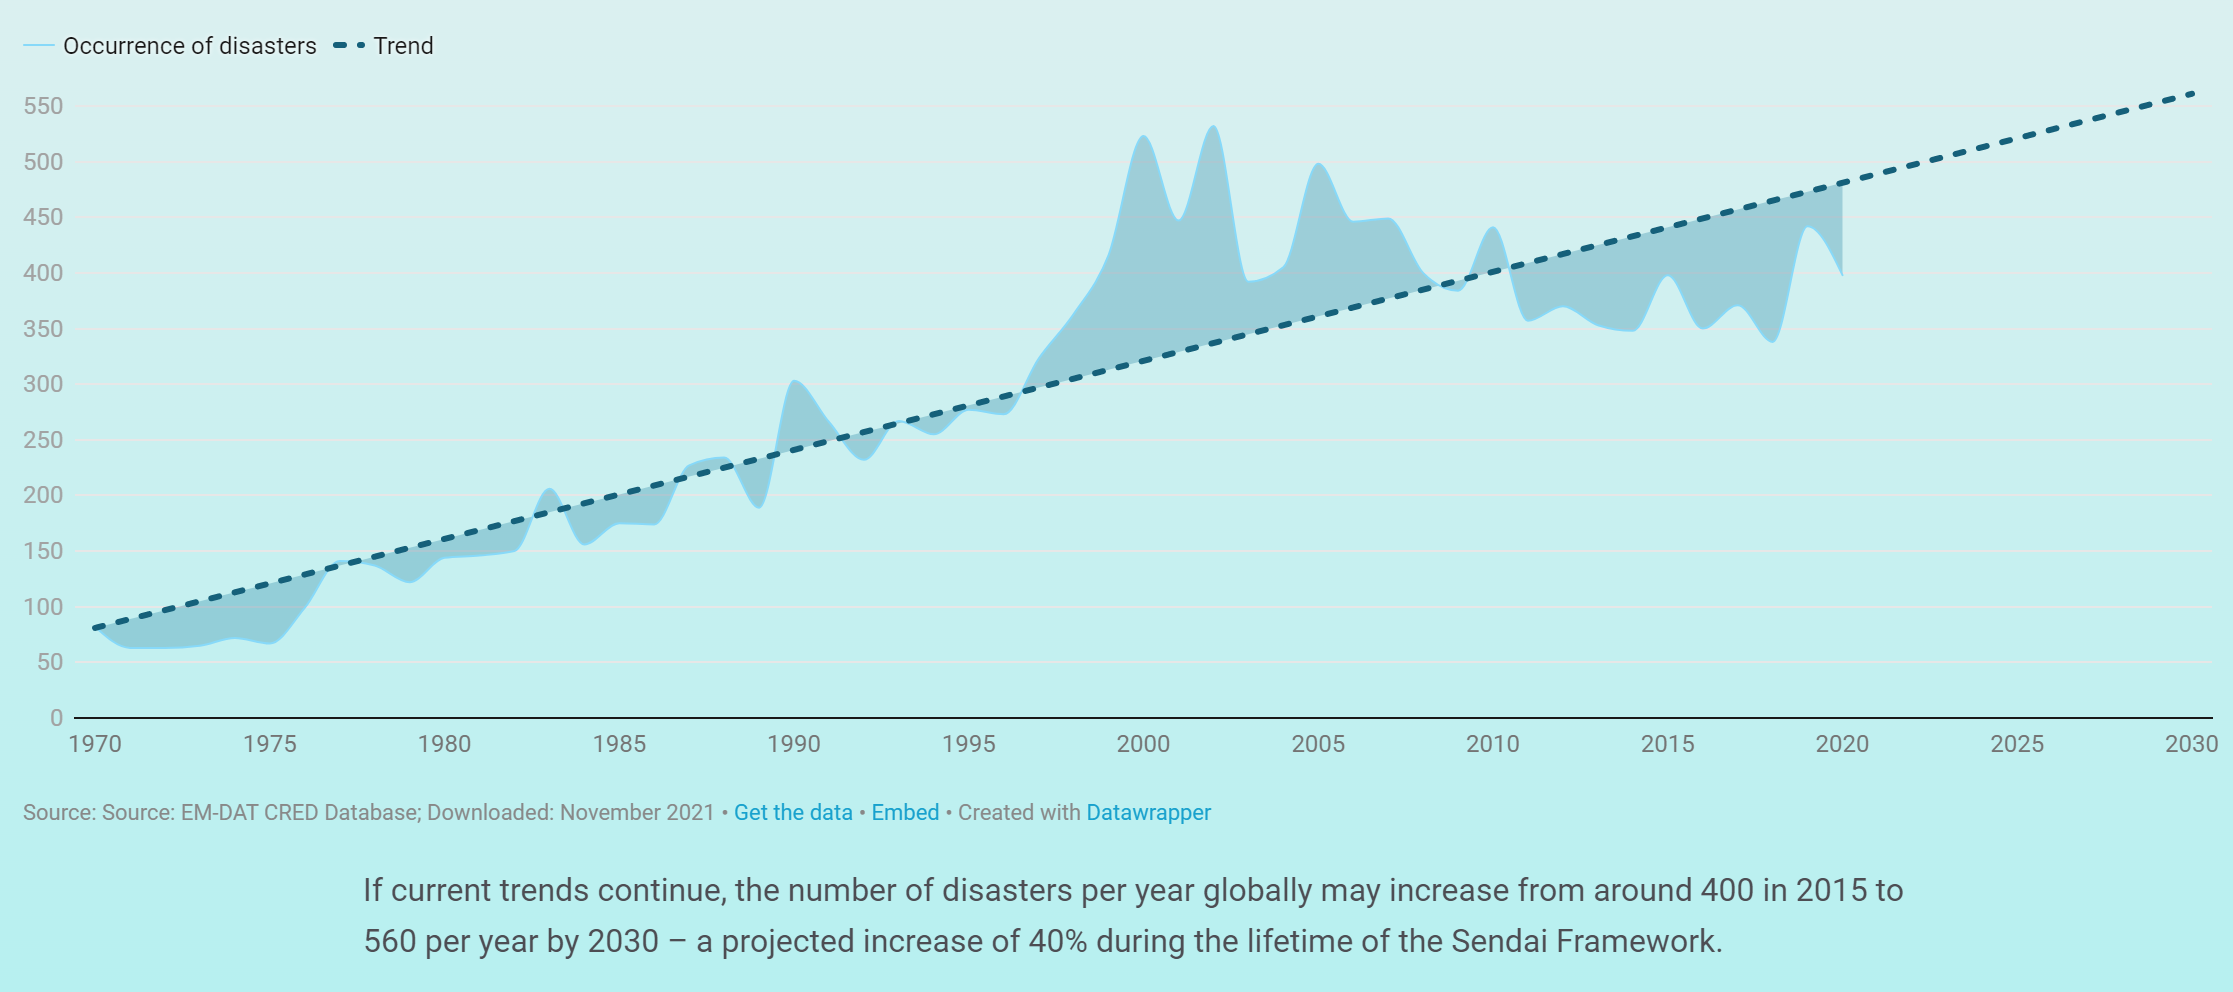 Occurrence of disasters, 1970-2021 and projected to 2030. Data: EM-DAT CRED Database, November 2021. If the current trend continues, the number of disasters per year globally may increase from around 400 in 2015 to 560 per year by 2030 – a projected increase of 40 percent during the lifetime of the Sendai Framework. Graphic: UNDRR